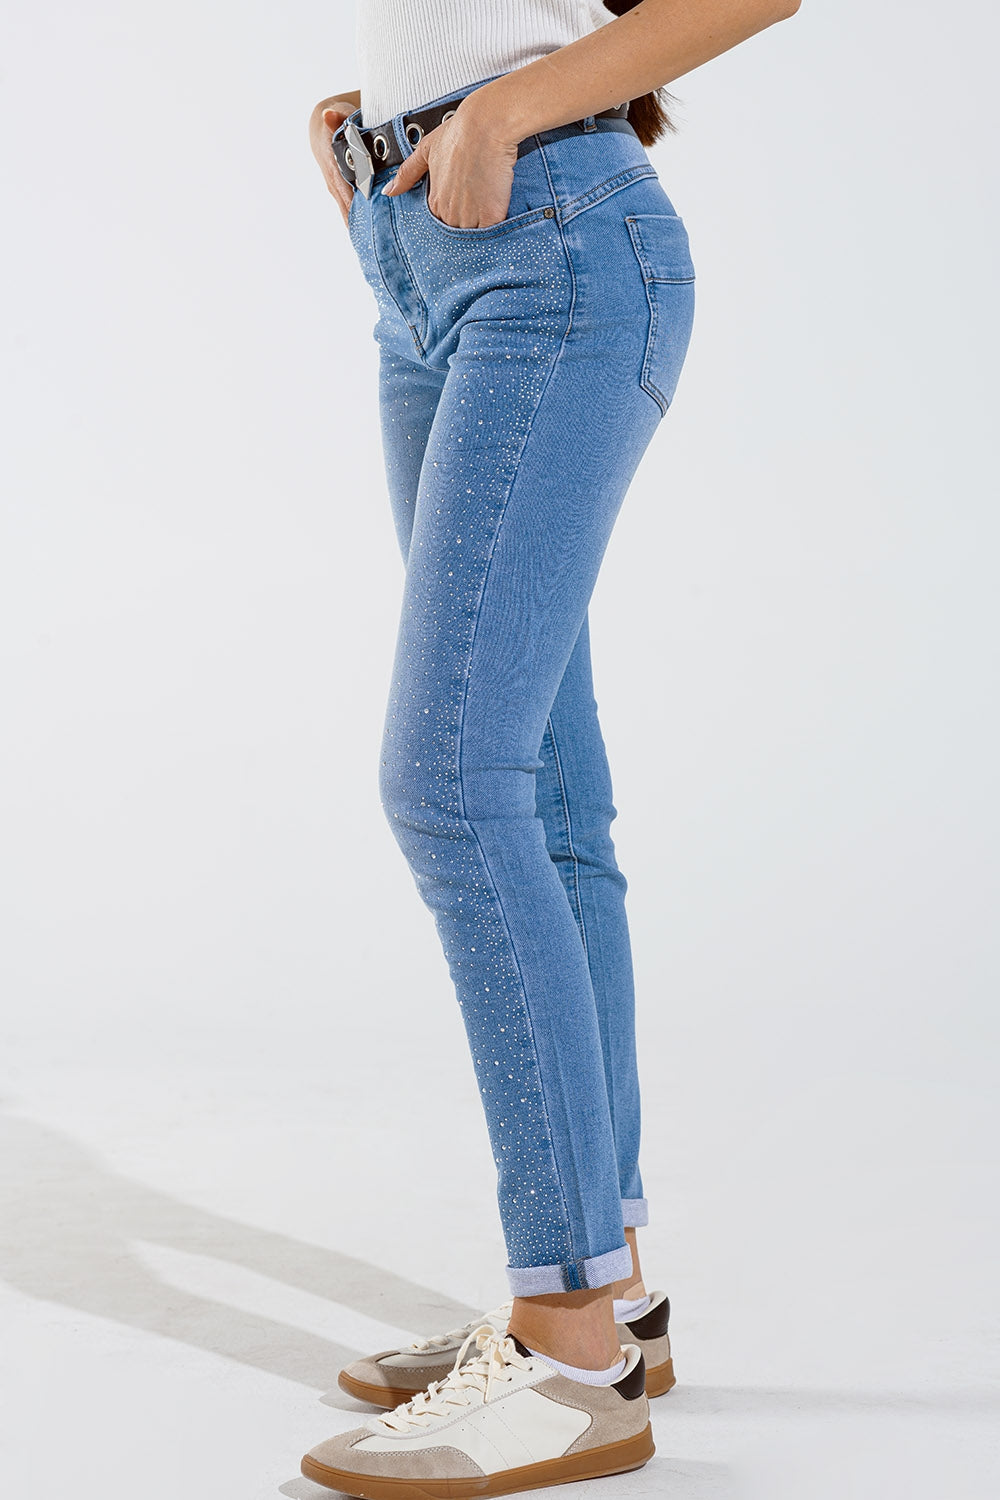 Skinny Jeans in Washed Blue with Strass All Over the Front